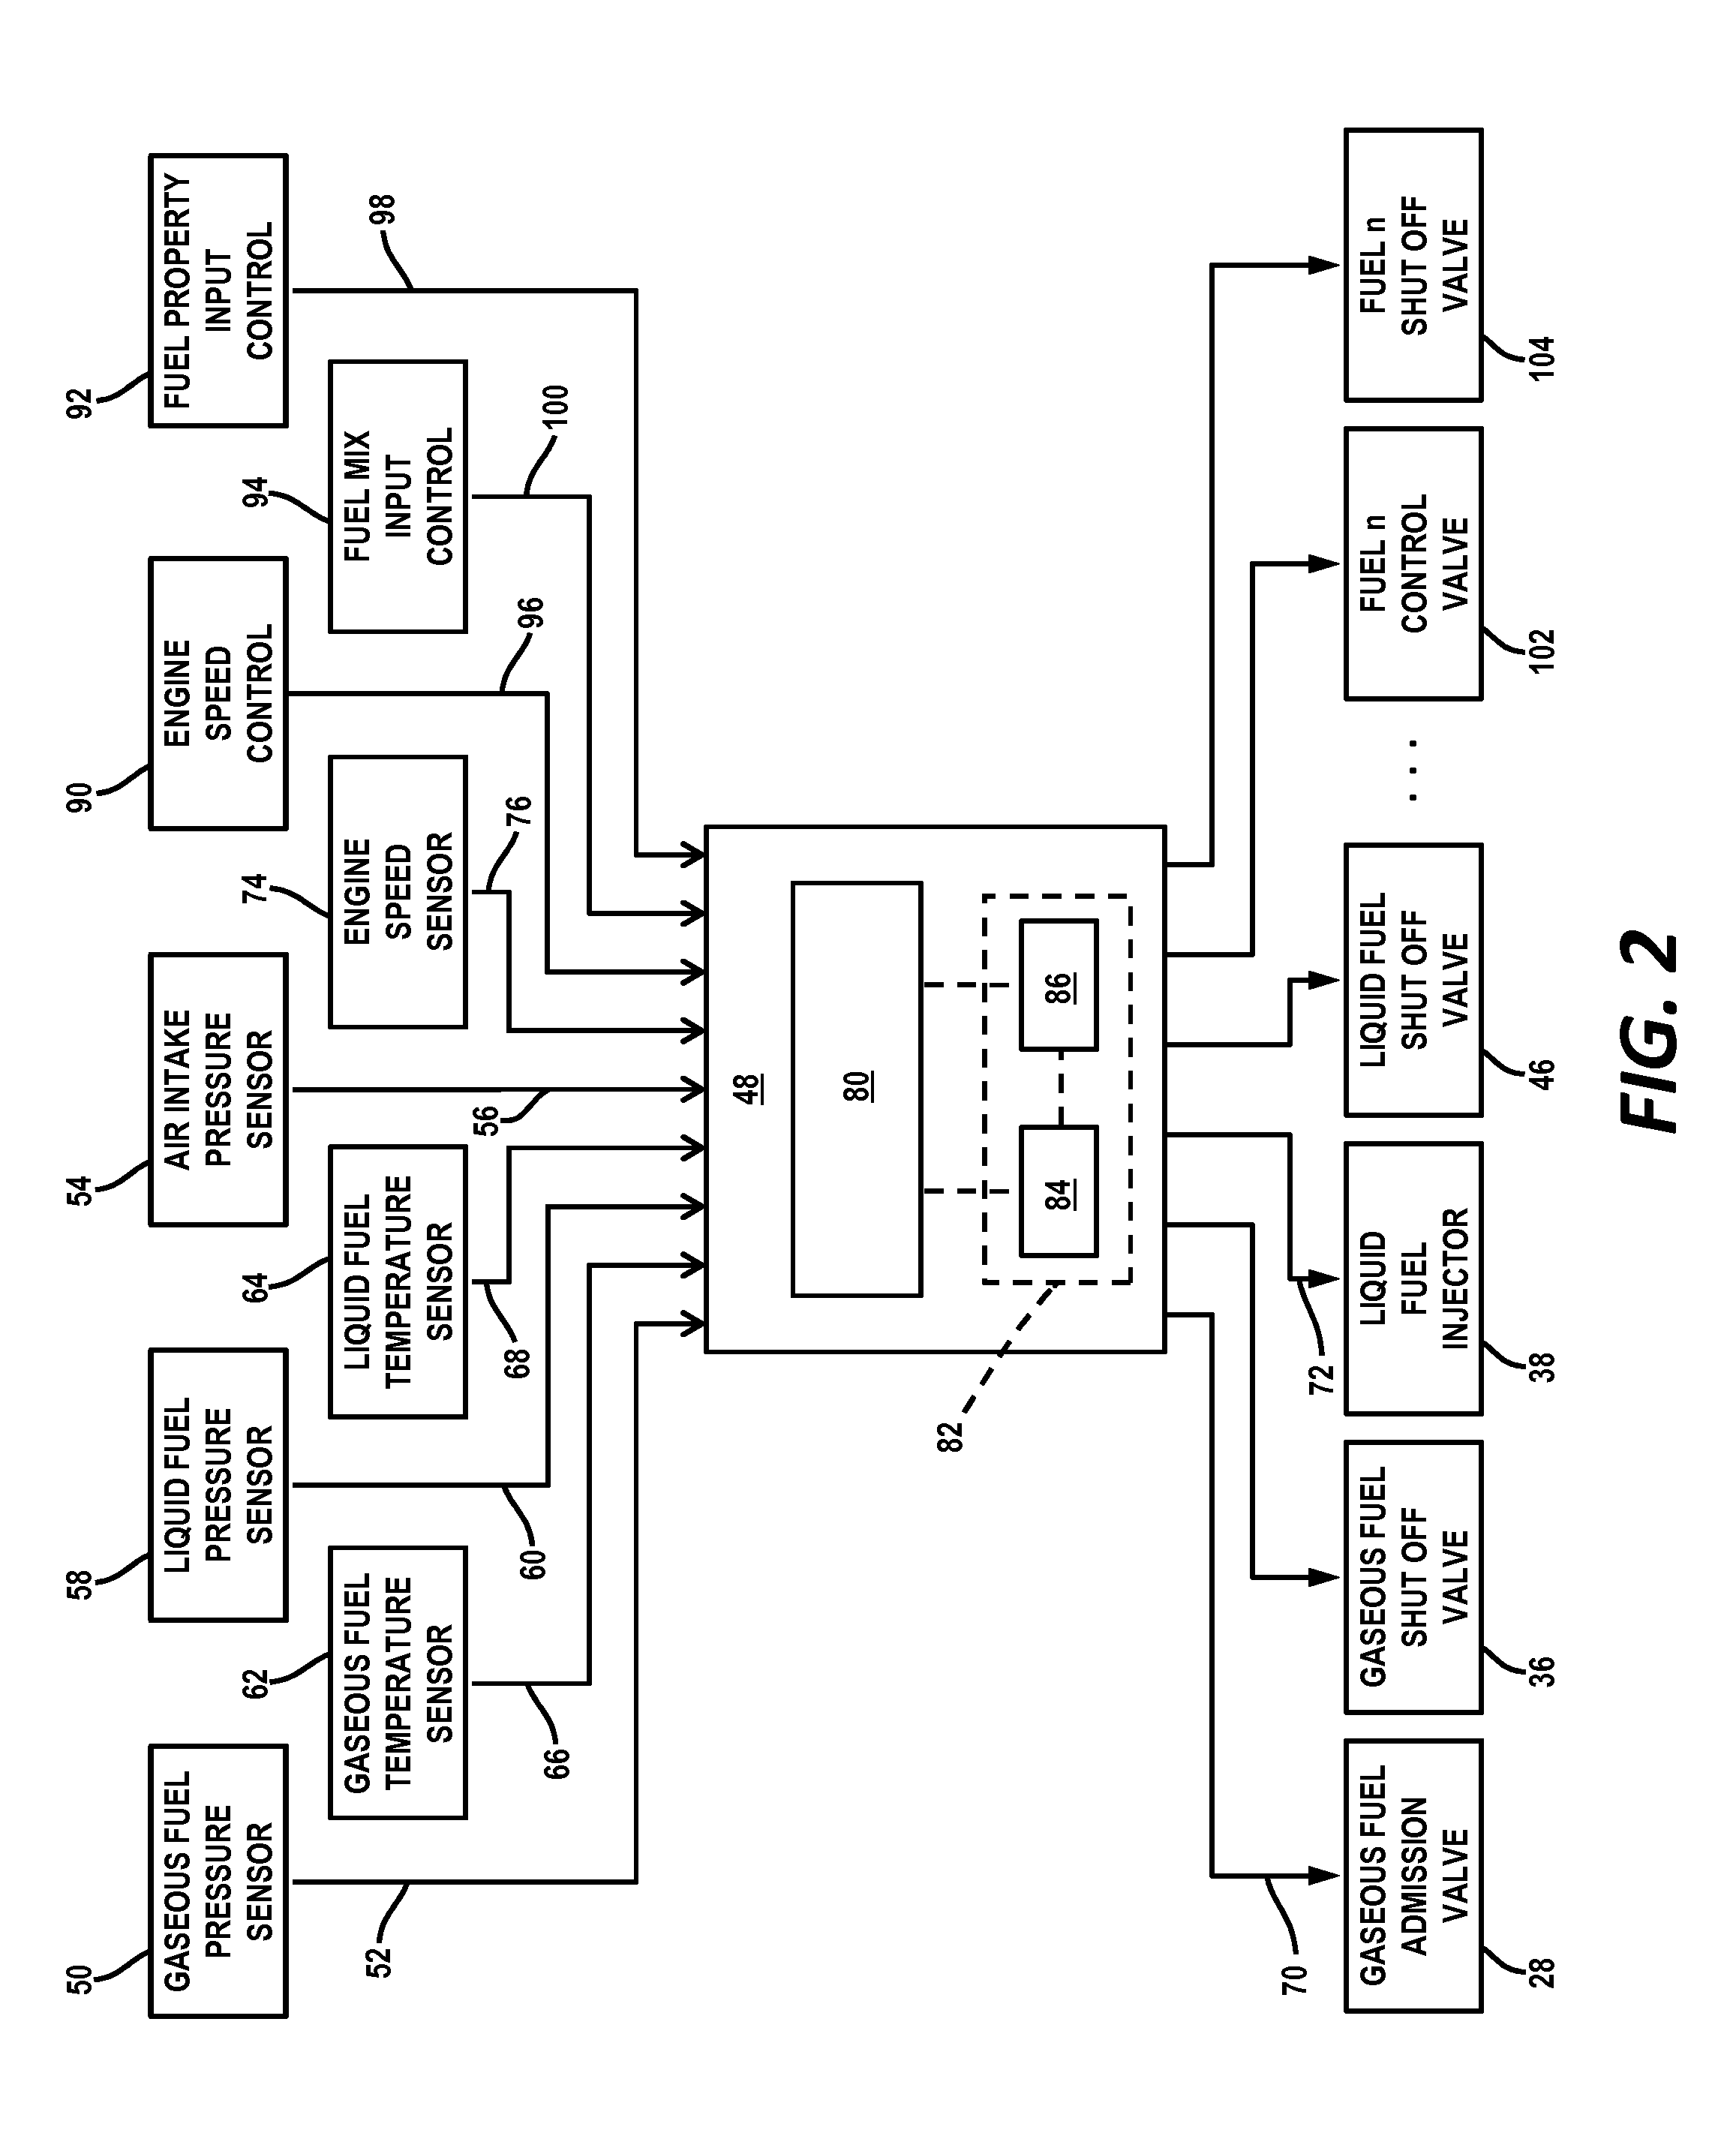 Fuel Apportionment for Multi Fuel Engine System